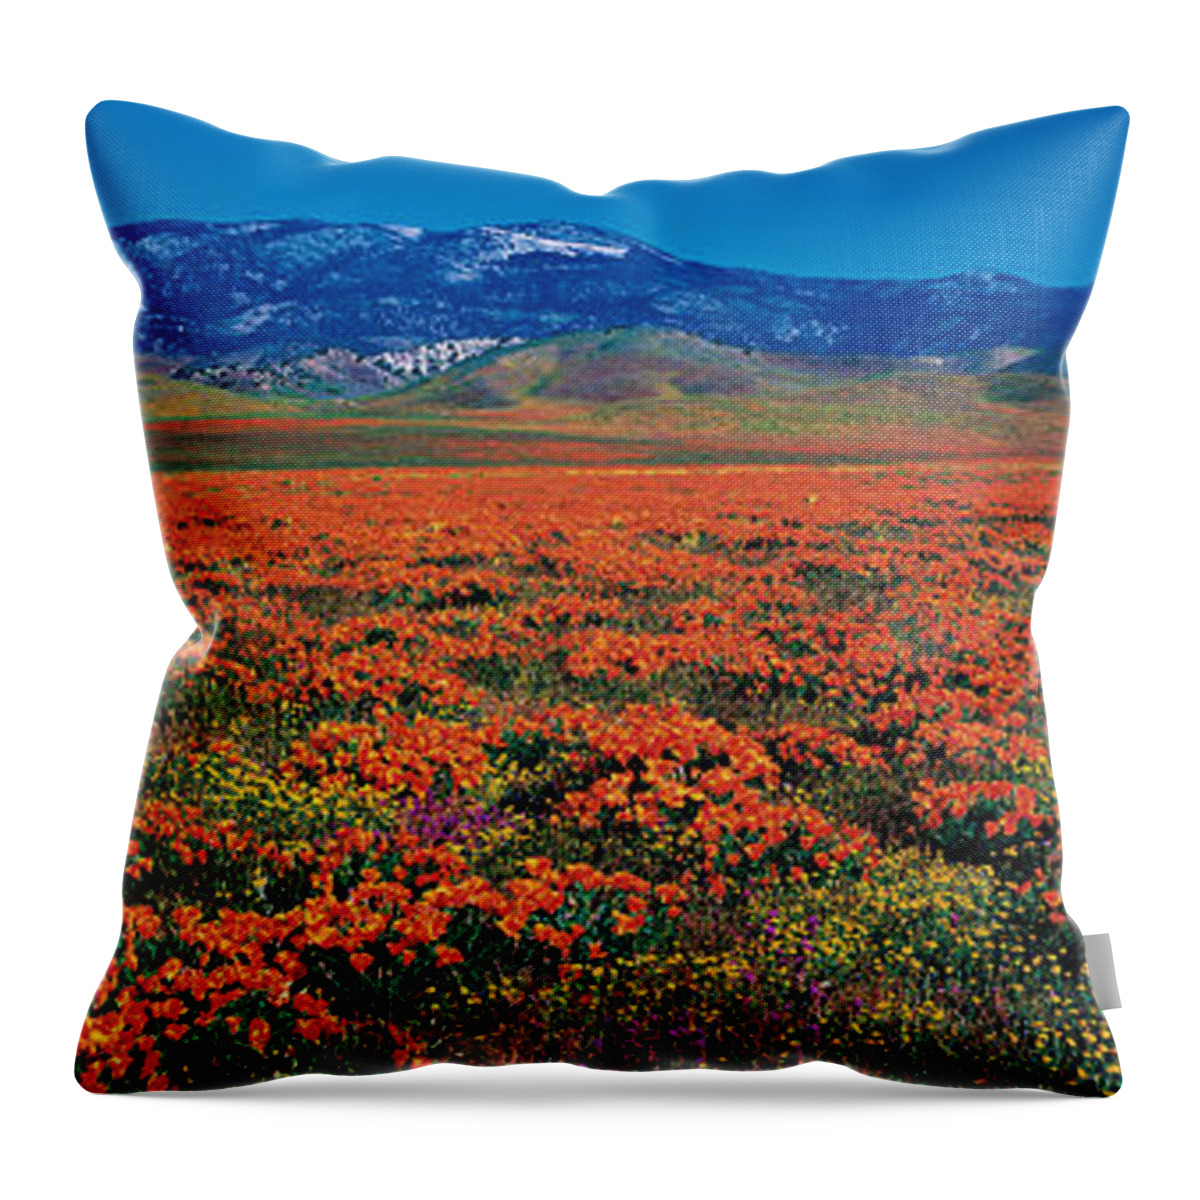 Photography Throw Pillow featuring the photograph Field, Poppy Flowers, Antelope Valley by Panoramic Images